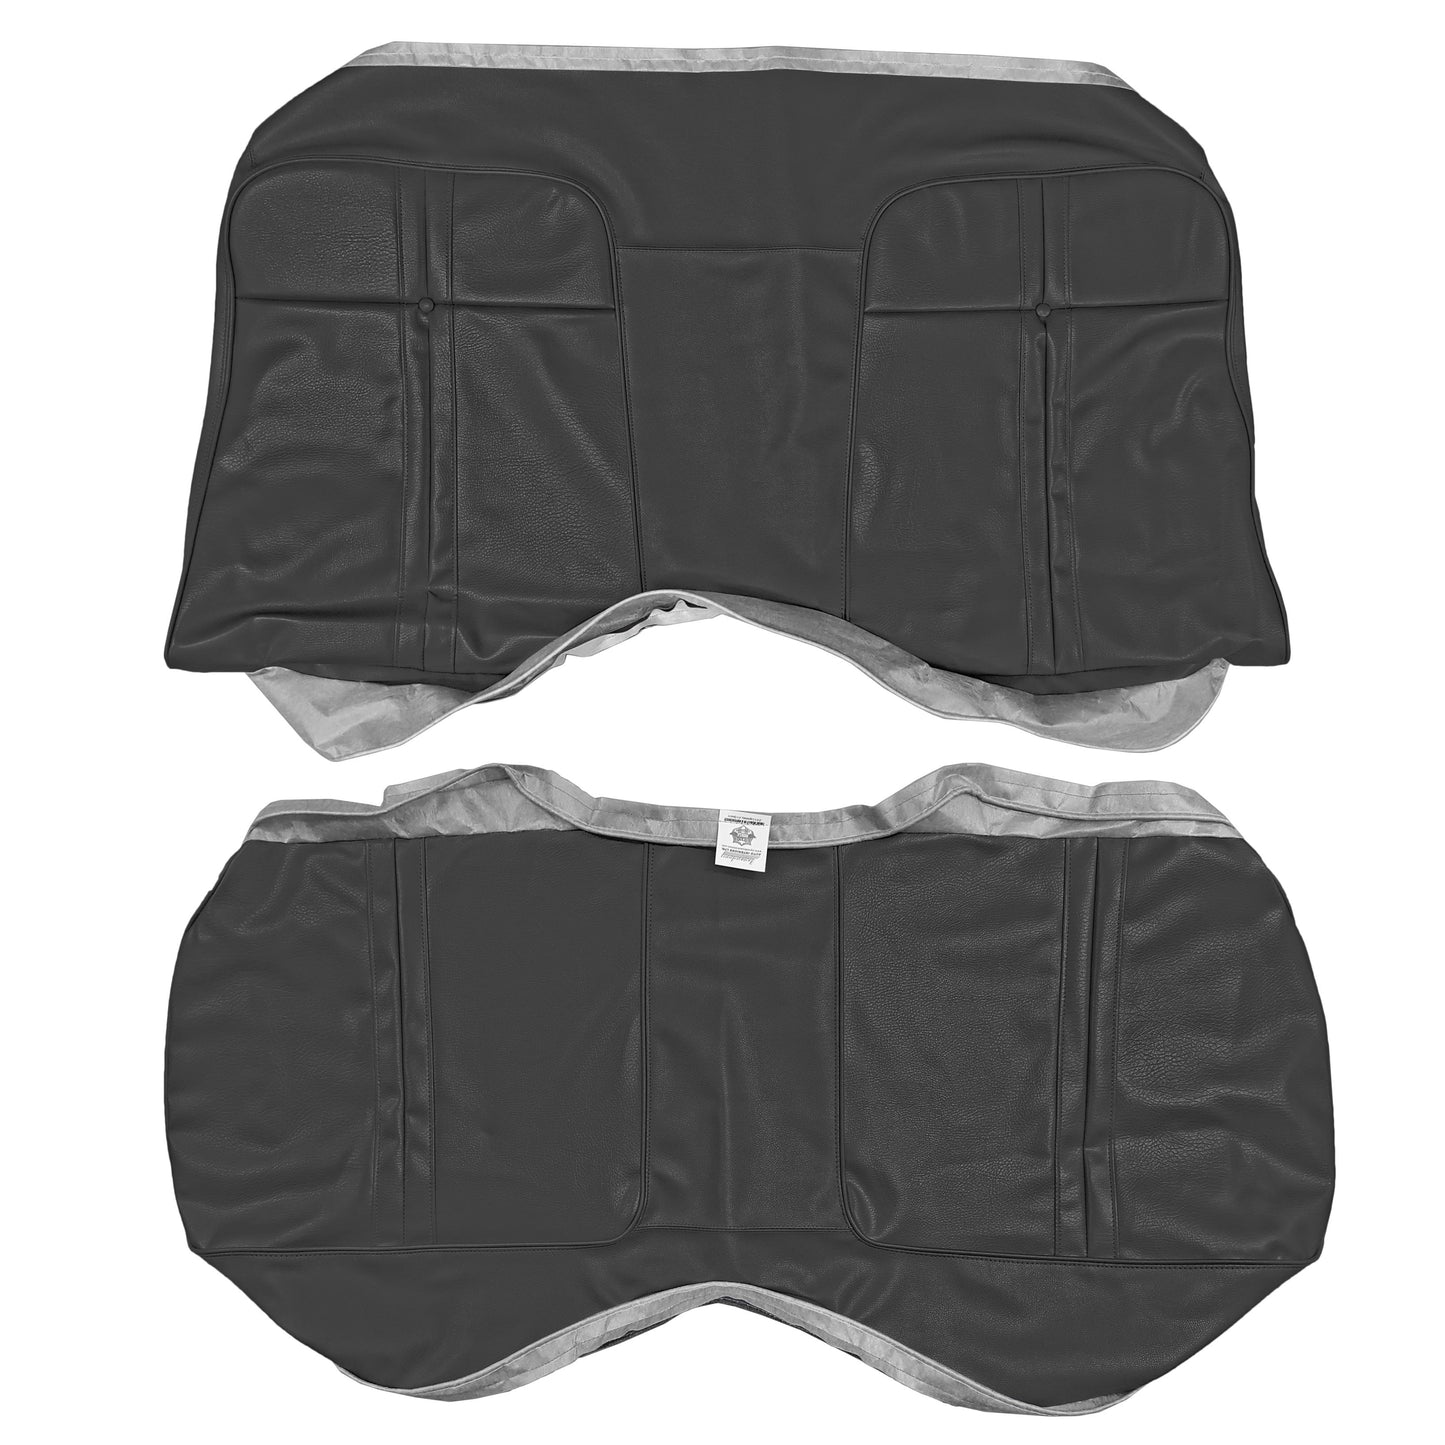 71 BARRACUDA/ CHALLENGER REAR UPHOLSTERY - BLACK